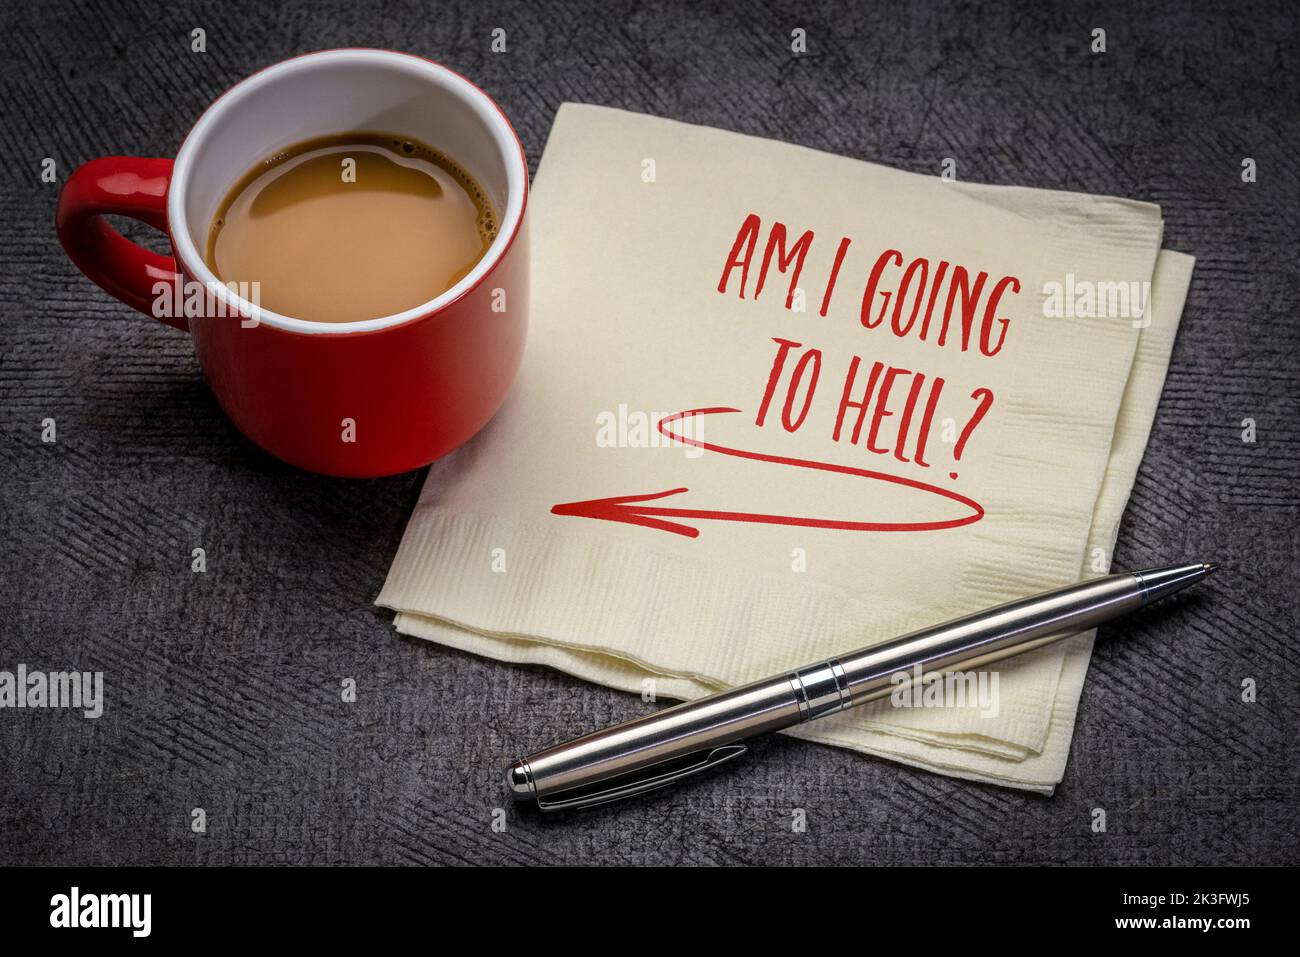 Am I going to hell? A question handwritten on a napkin with a cup of coffee. Damnation and eternal punishment concept. Stock Photo